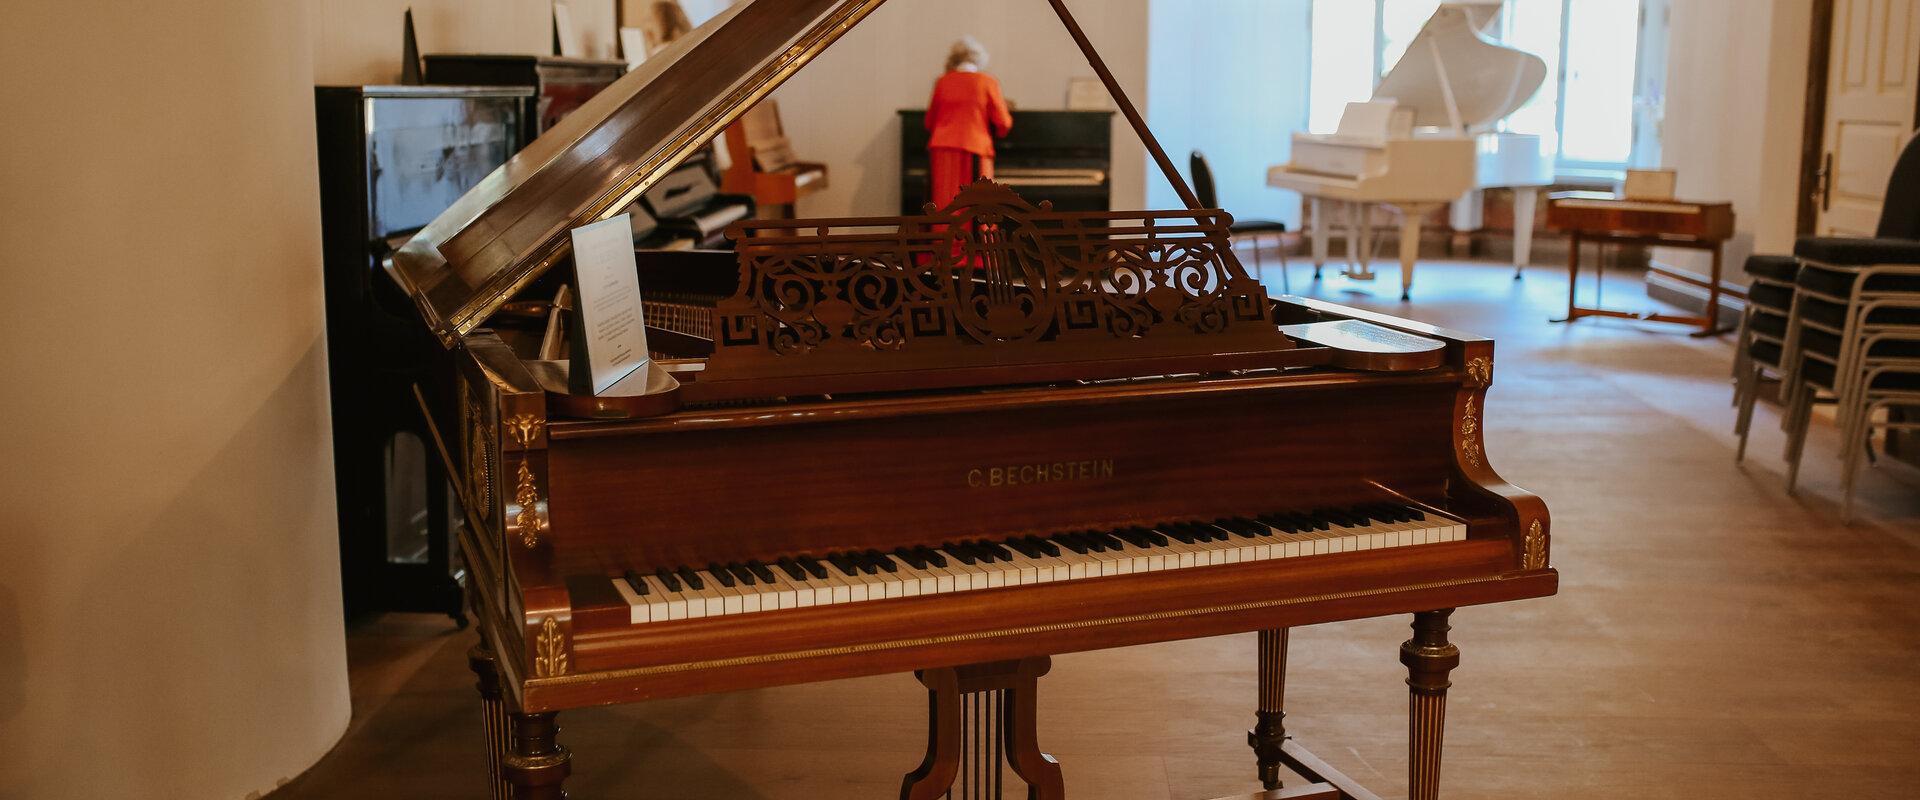 The National Piano Museum